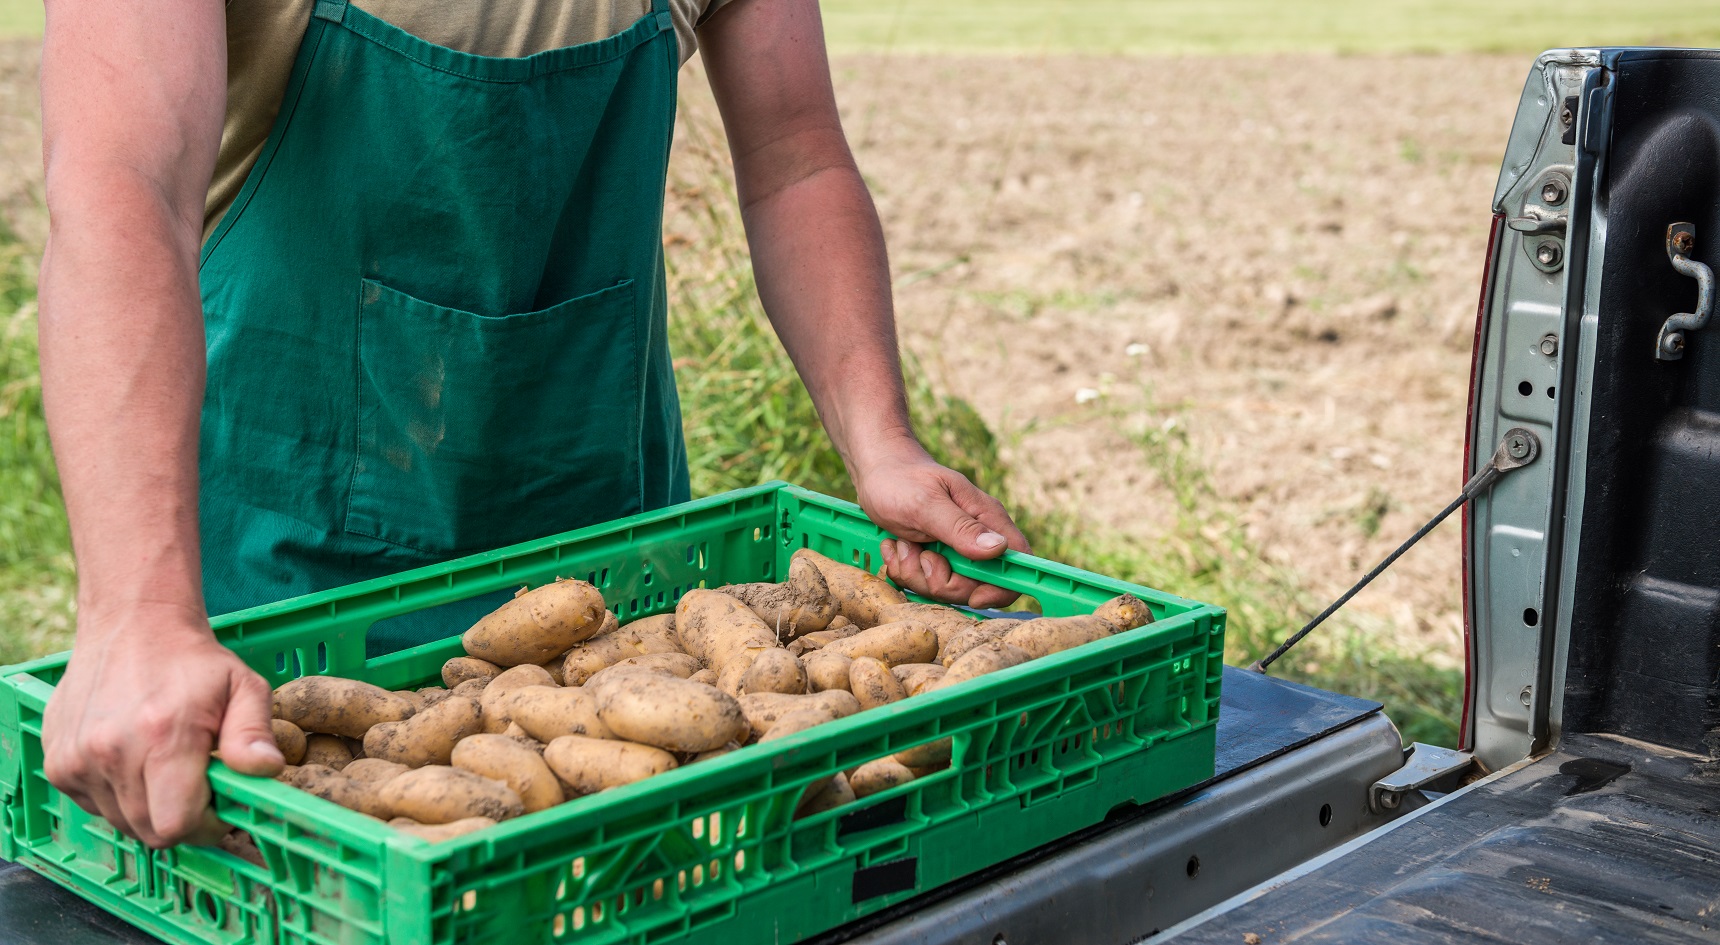 Tray of potatoes being loaded into a ute's tray by a man wearing a green apron.